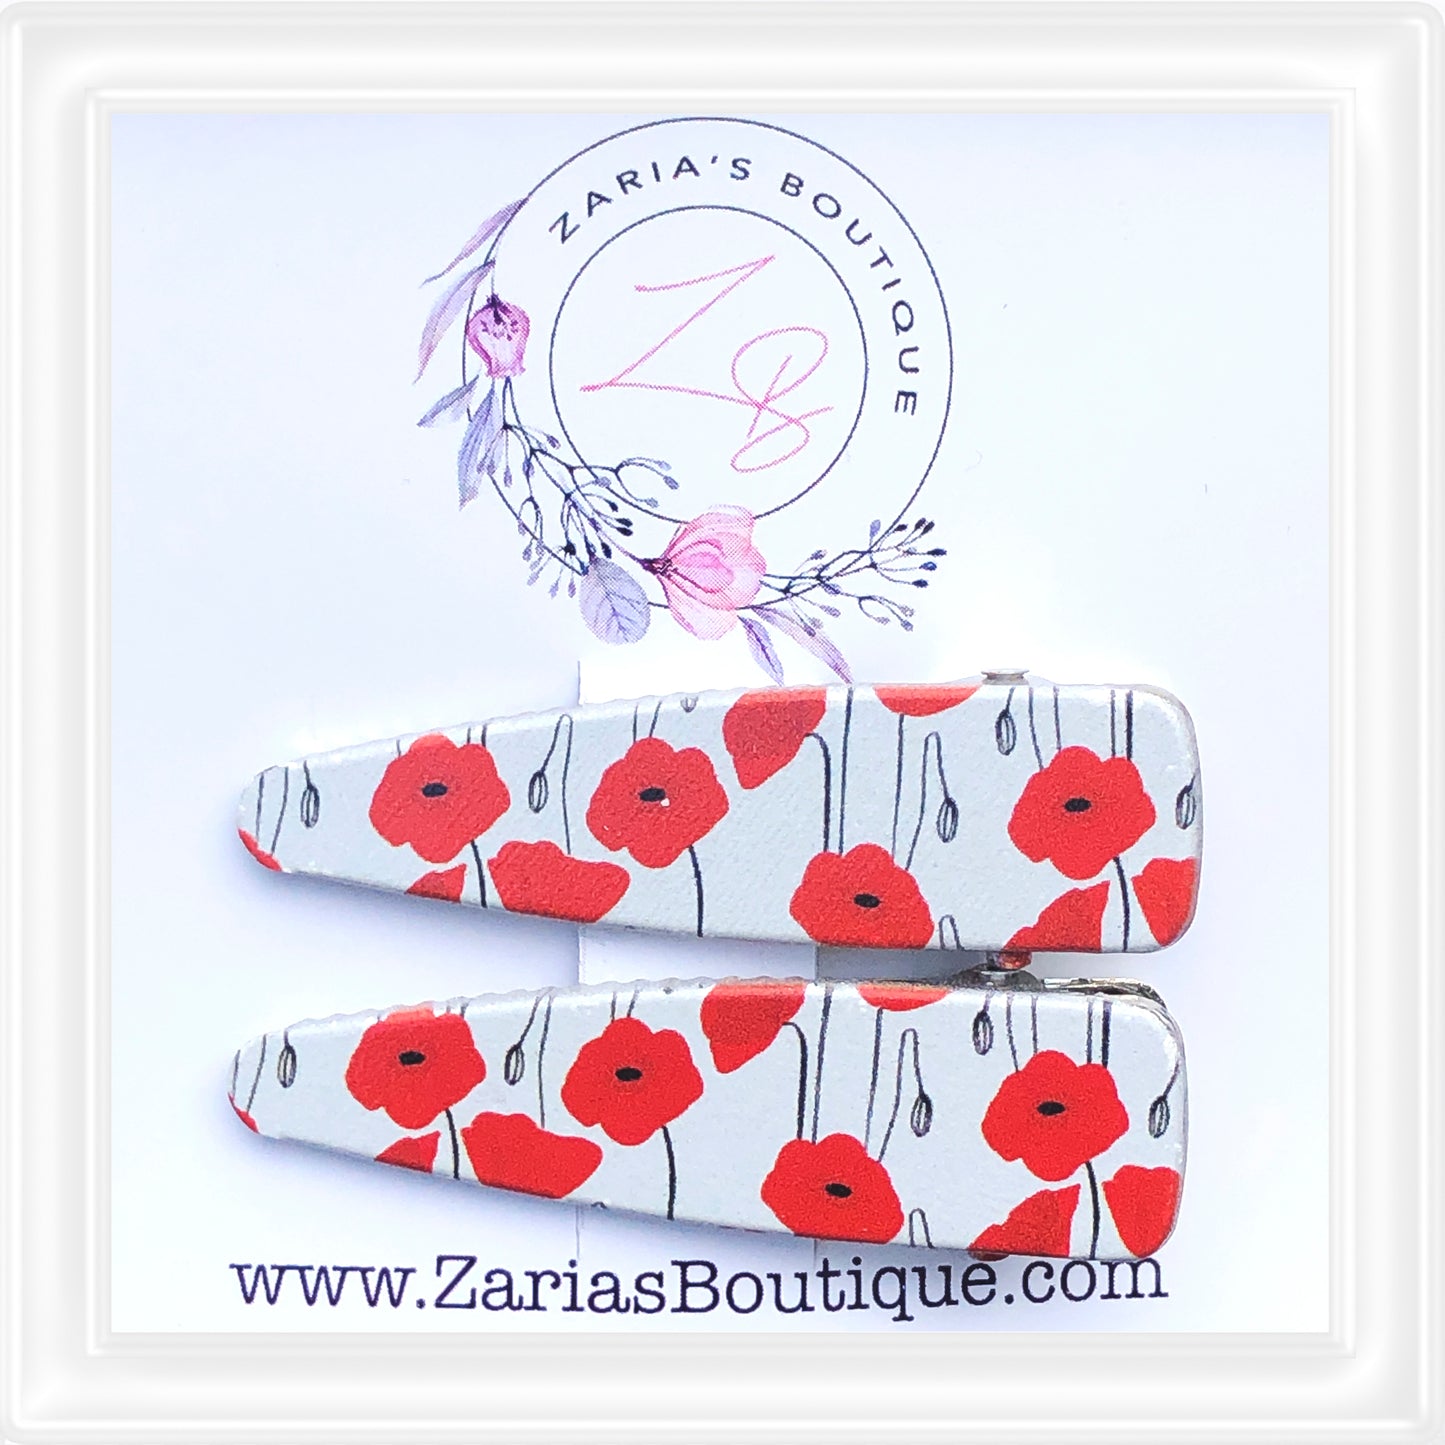 ⋅ EXCLUSIVE ⋅ Lest We Forget ⋅ Red Poppies ⋅ Premium Hair Clips ⋅